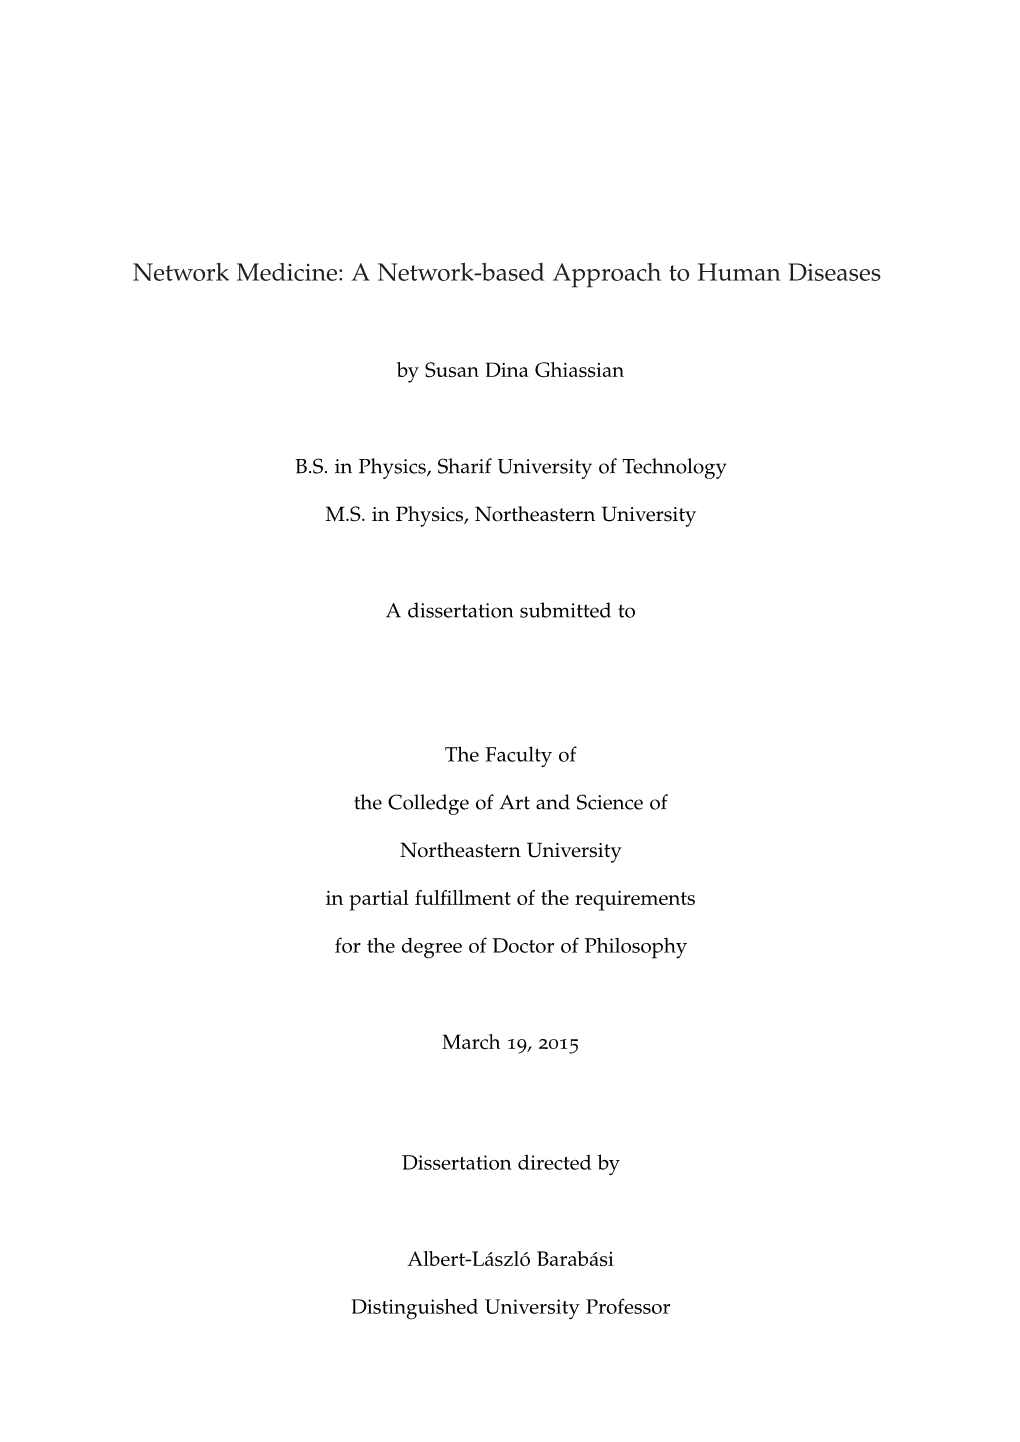 A Network-Based Approach to Human Diseases